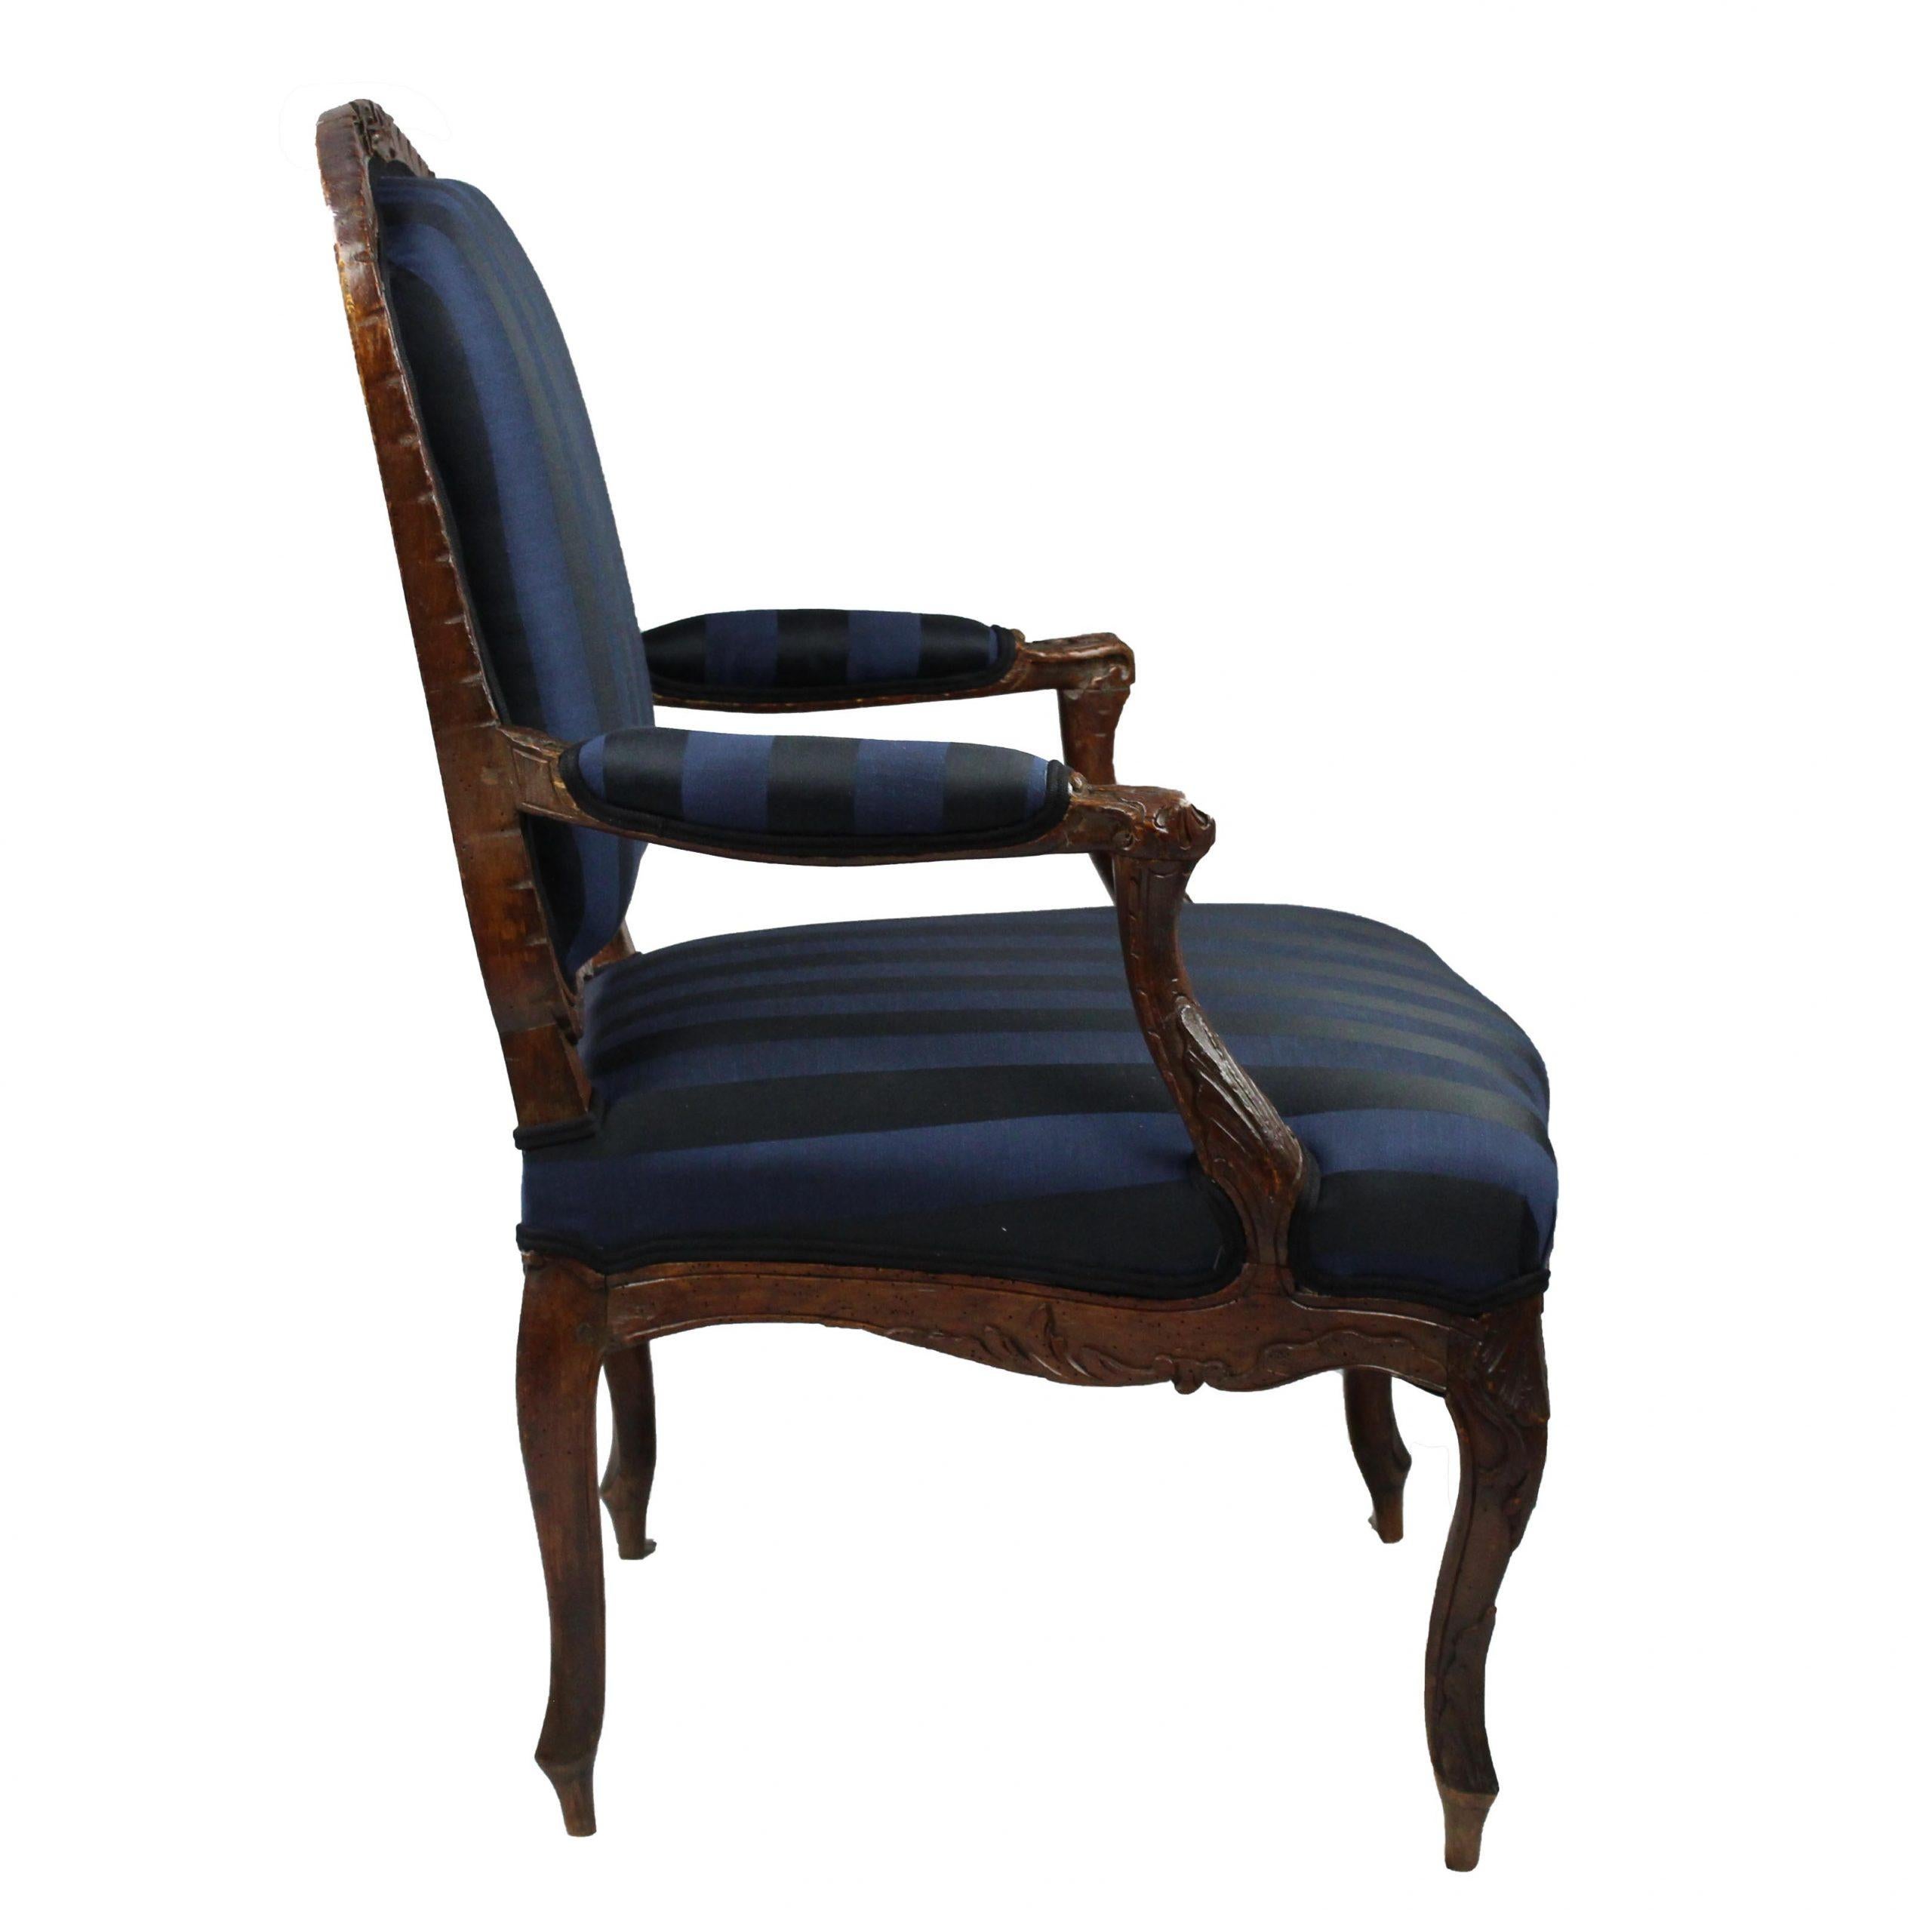 Mid-18th Century 18th Century French Rococo Armchair Fauteuil à la Reine around 1760 For Sale